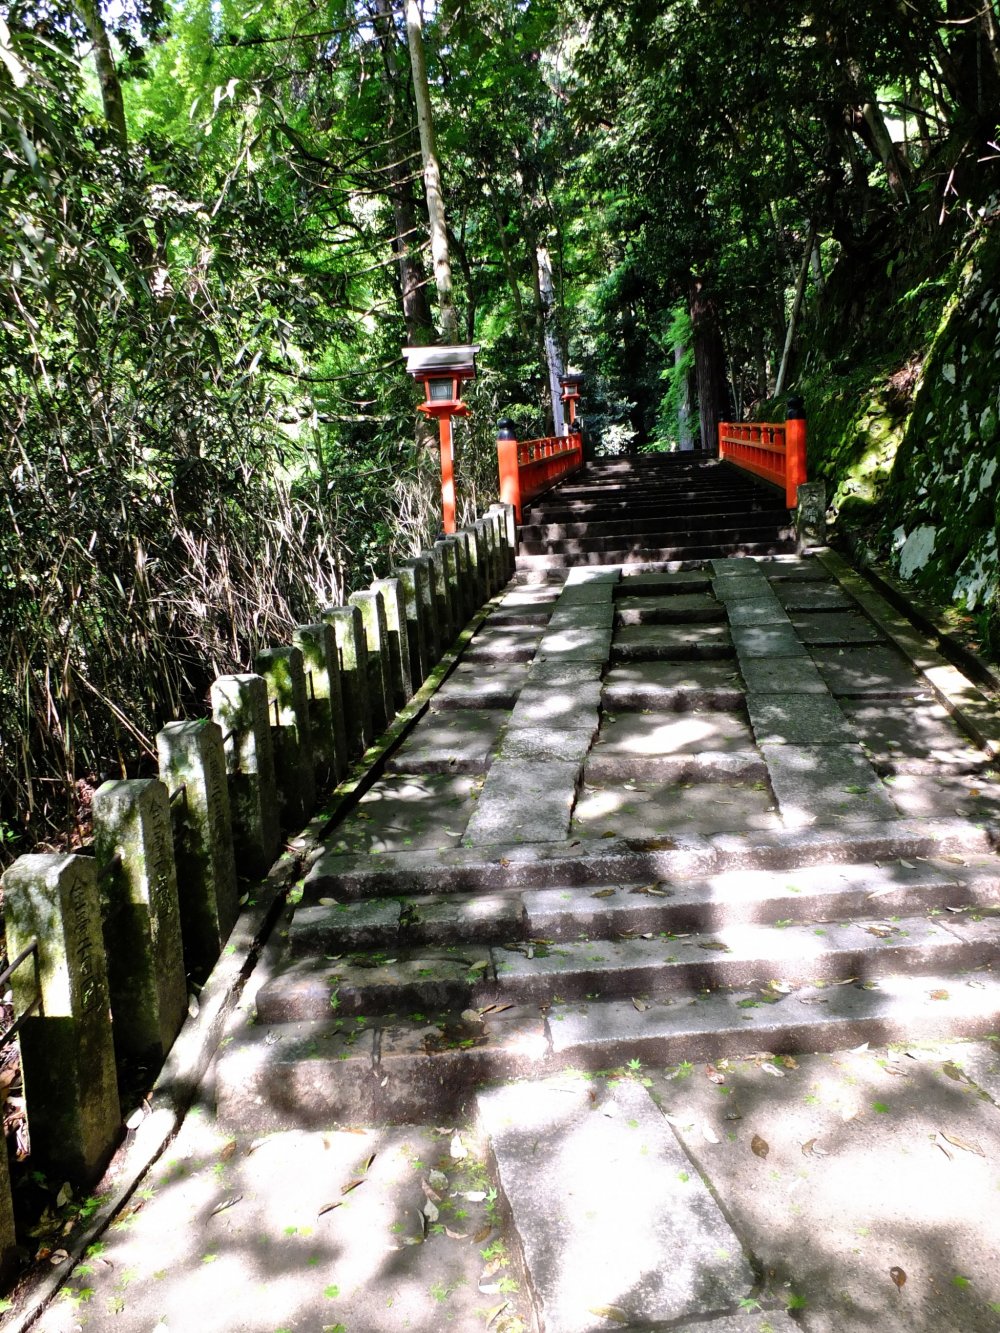 After passing the shrine near the station, there is a nice climb up to Kurama&nbsp;Temple